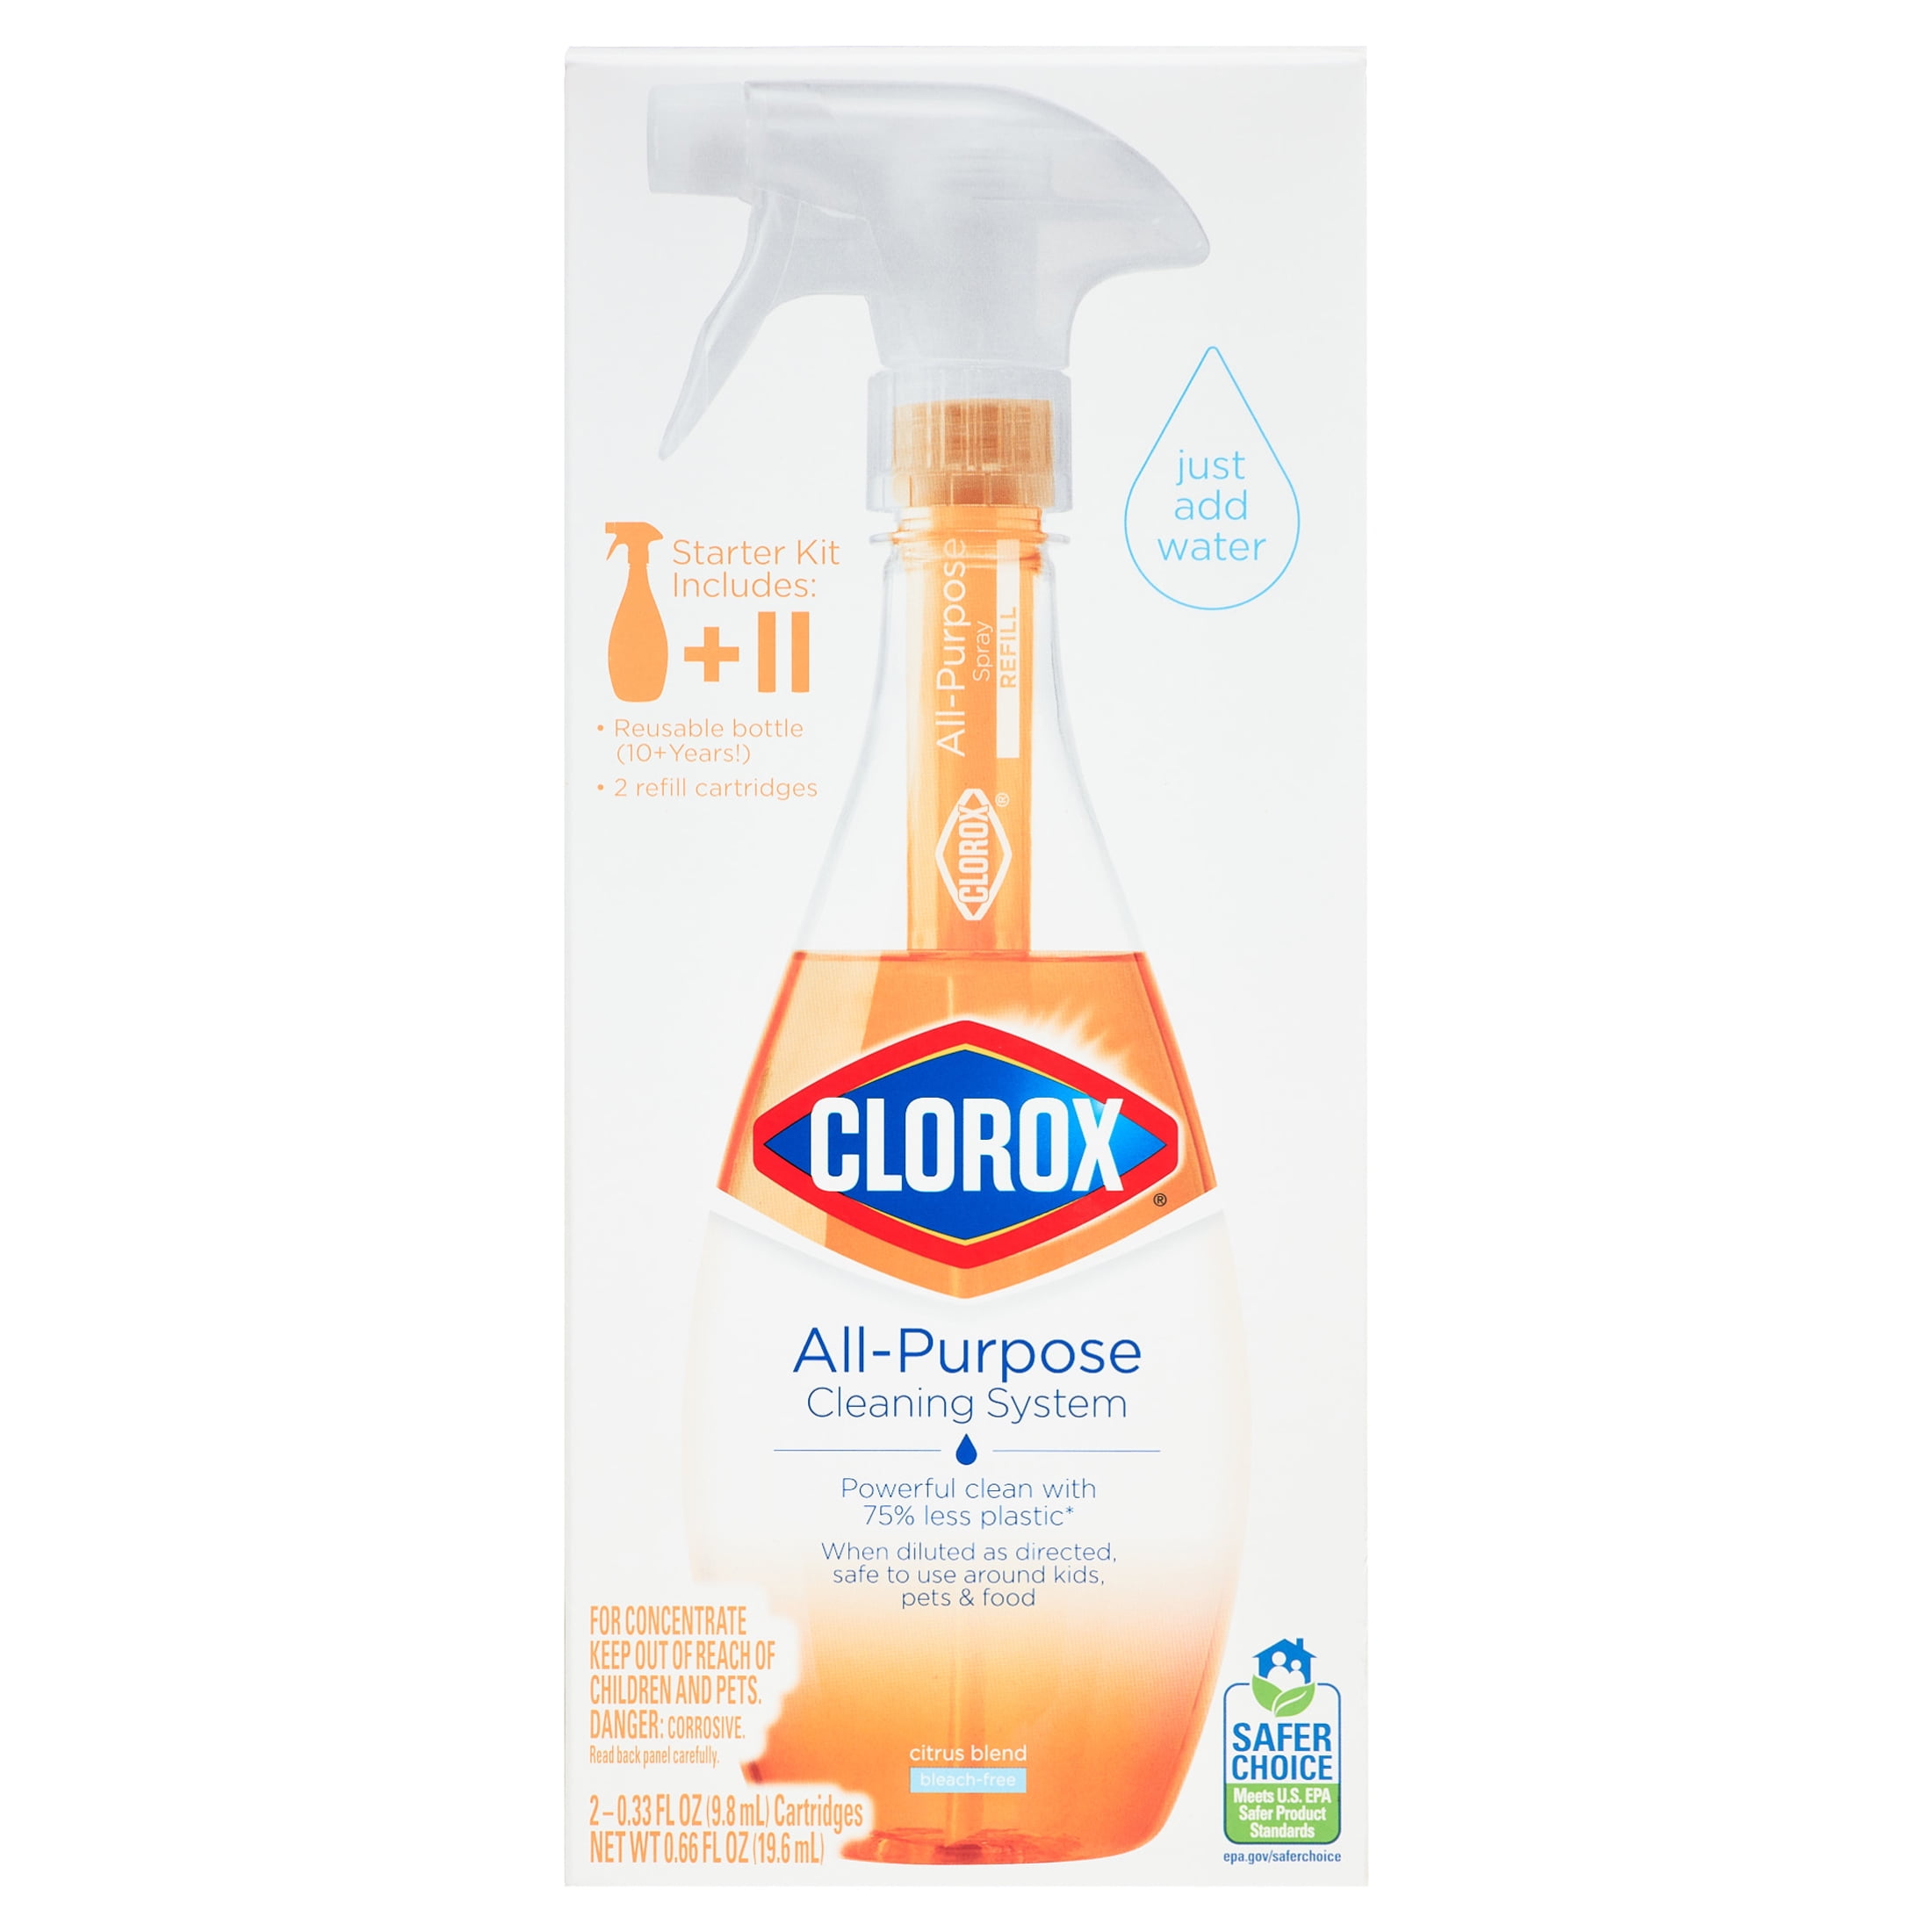 CLEAN IT MULTI-PURPOSE CONCENTRATE CLEANER- 2 Bottles